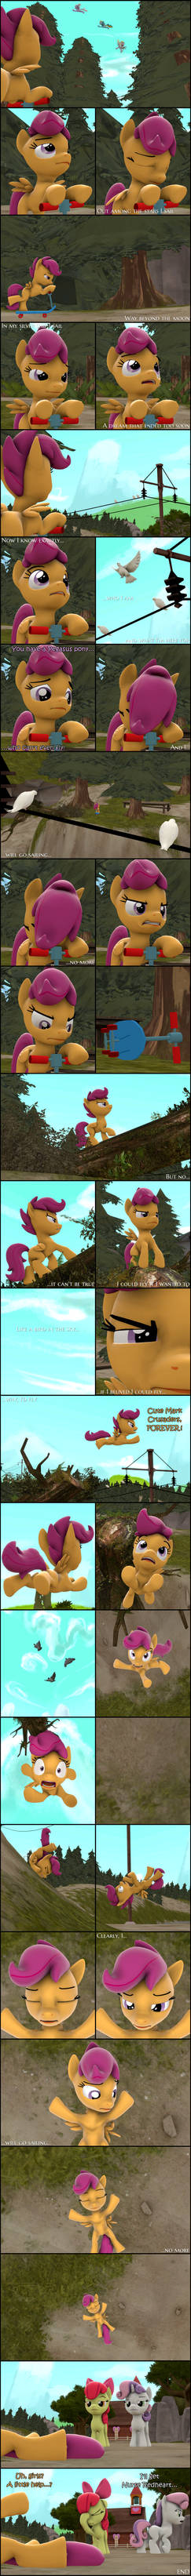 Scootaloo will go sailing no more (MLP Comic)